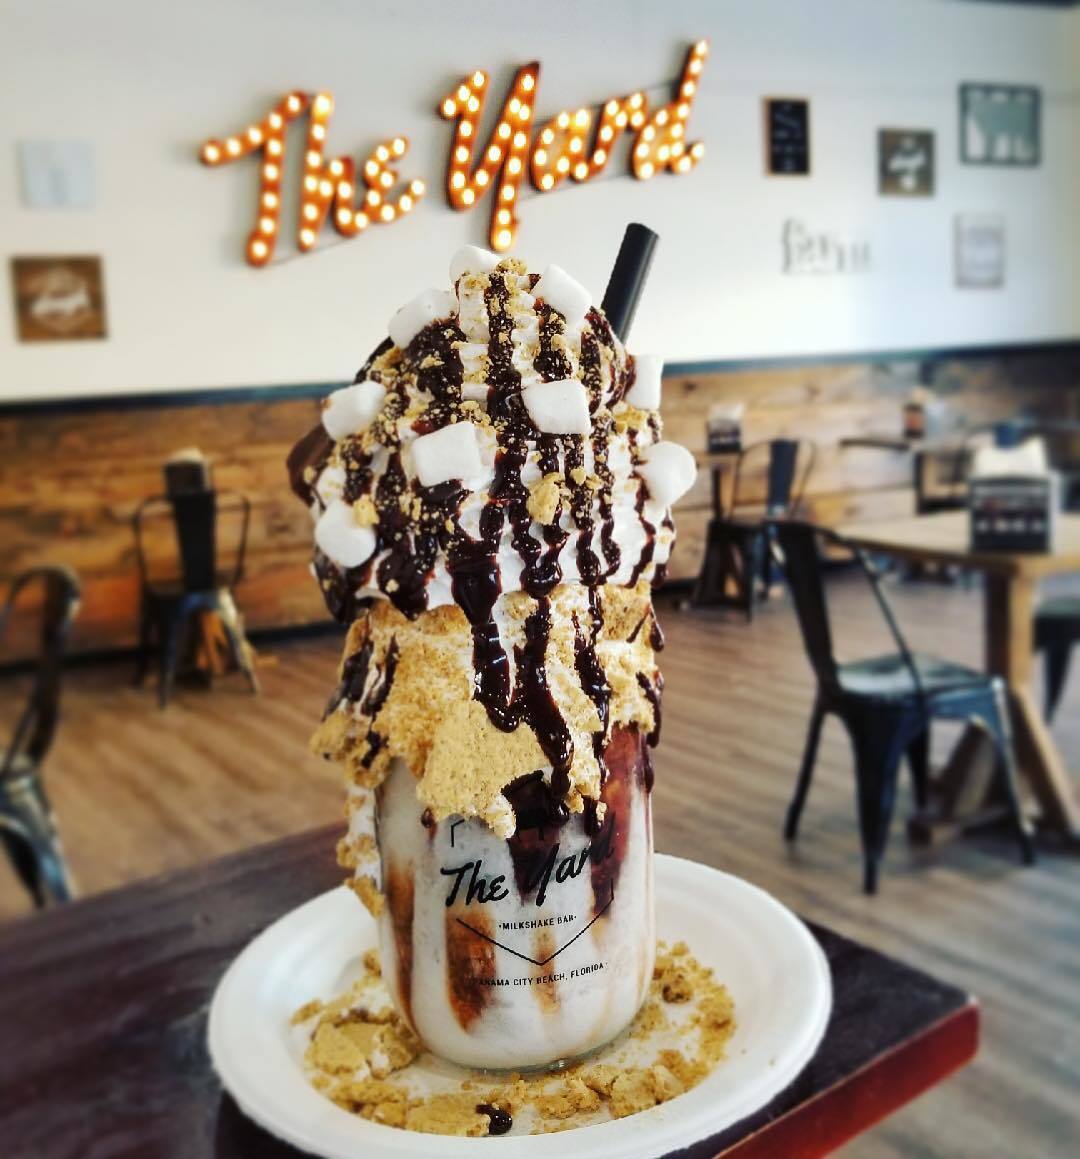 The Yard Milkshake Bar sells bowls, scoops, floats and $16 specialty ice cream concoctions that feature toppings like doughnuts, chocolate-dipped bacon and brownies.